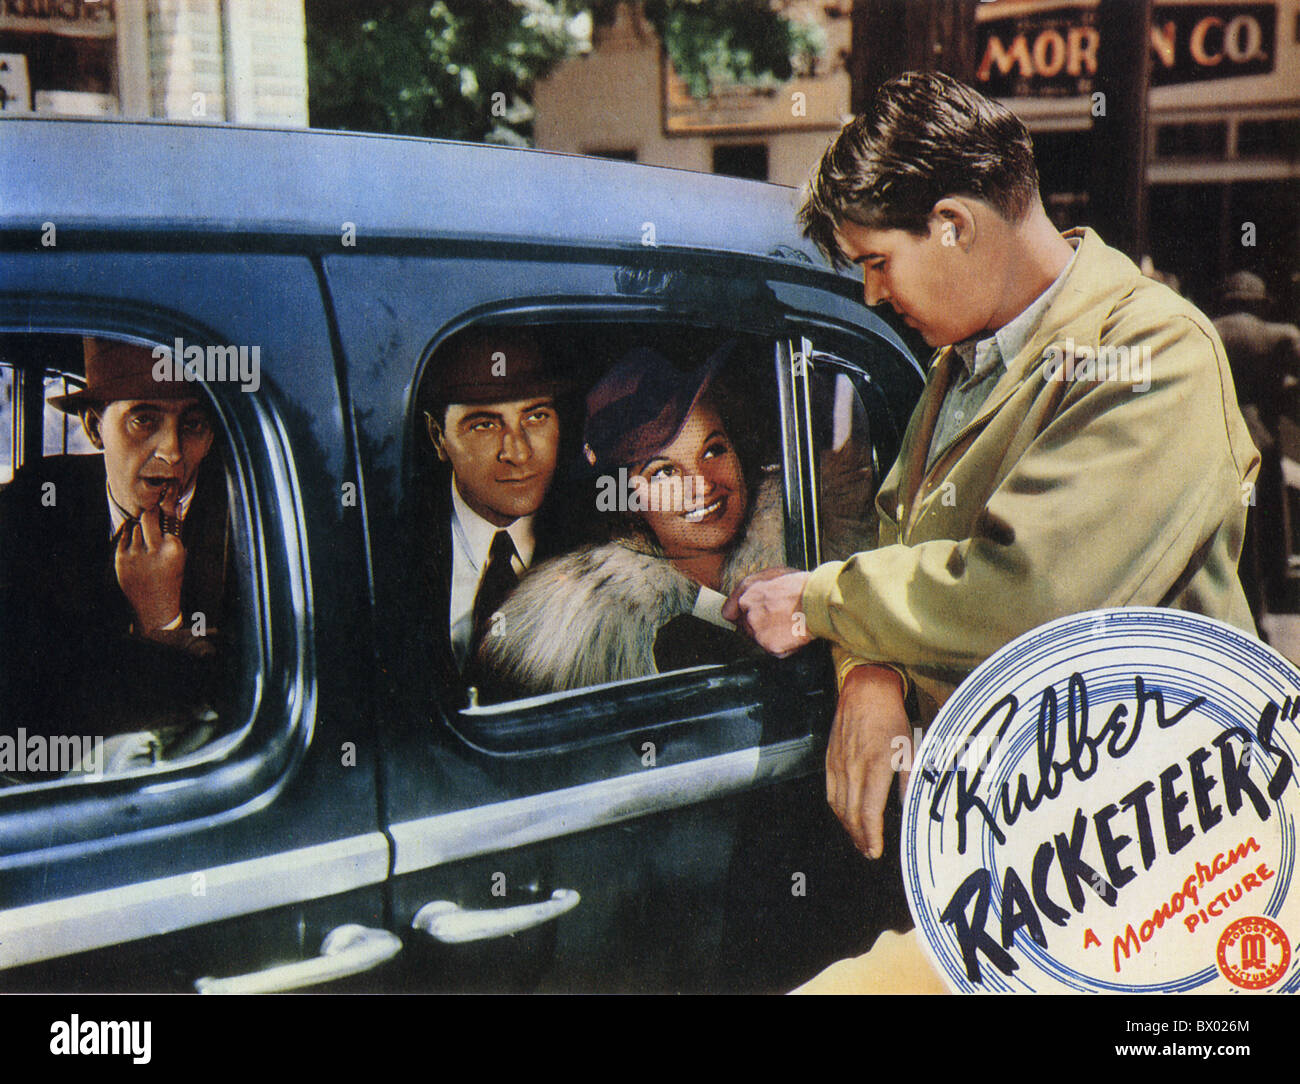 RUBBER RACKETEERS Poster for 1942 Monogram film with Ricardo Cortez at left and in the car Rochelle Hudson Stock Photo